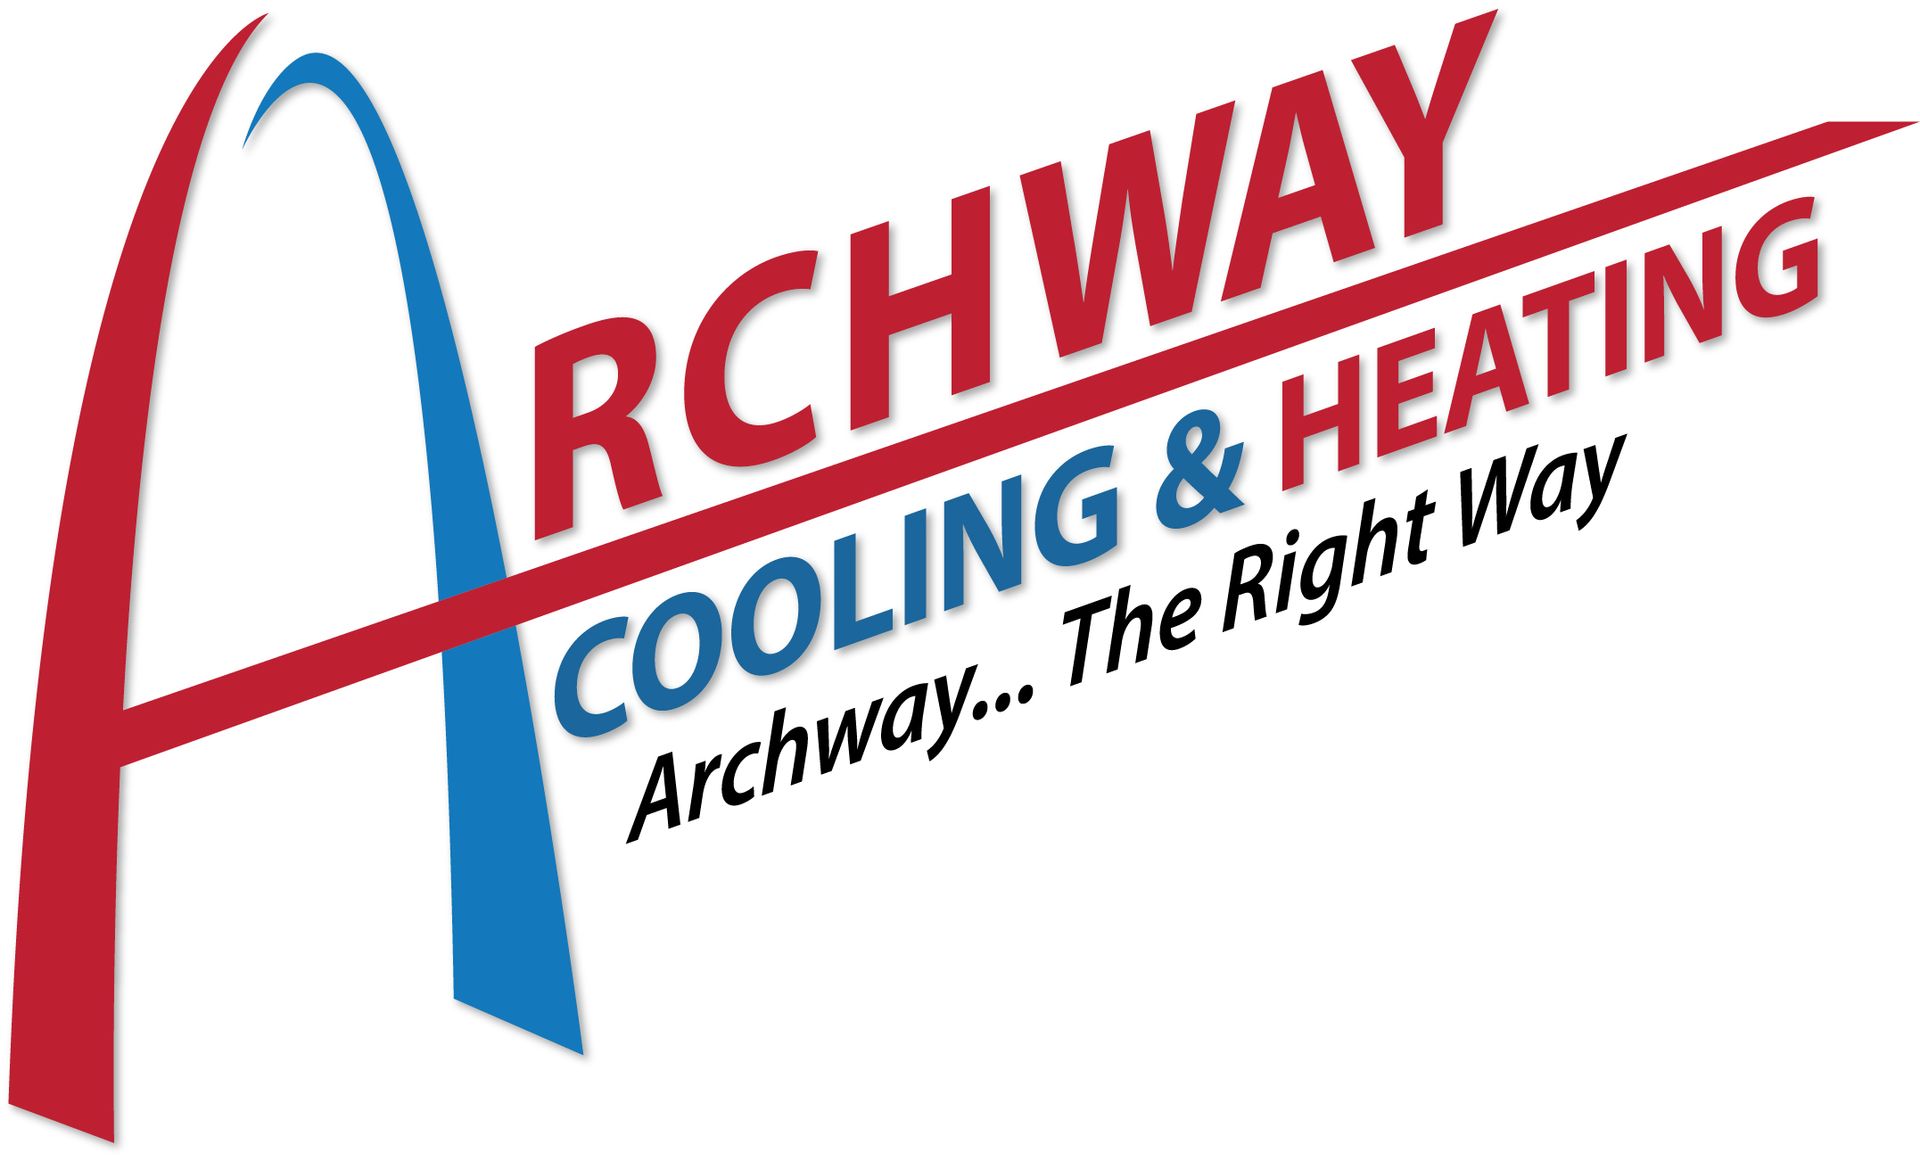 Archway Cooling & Heating logo